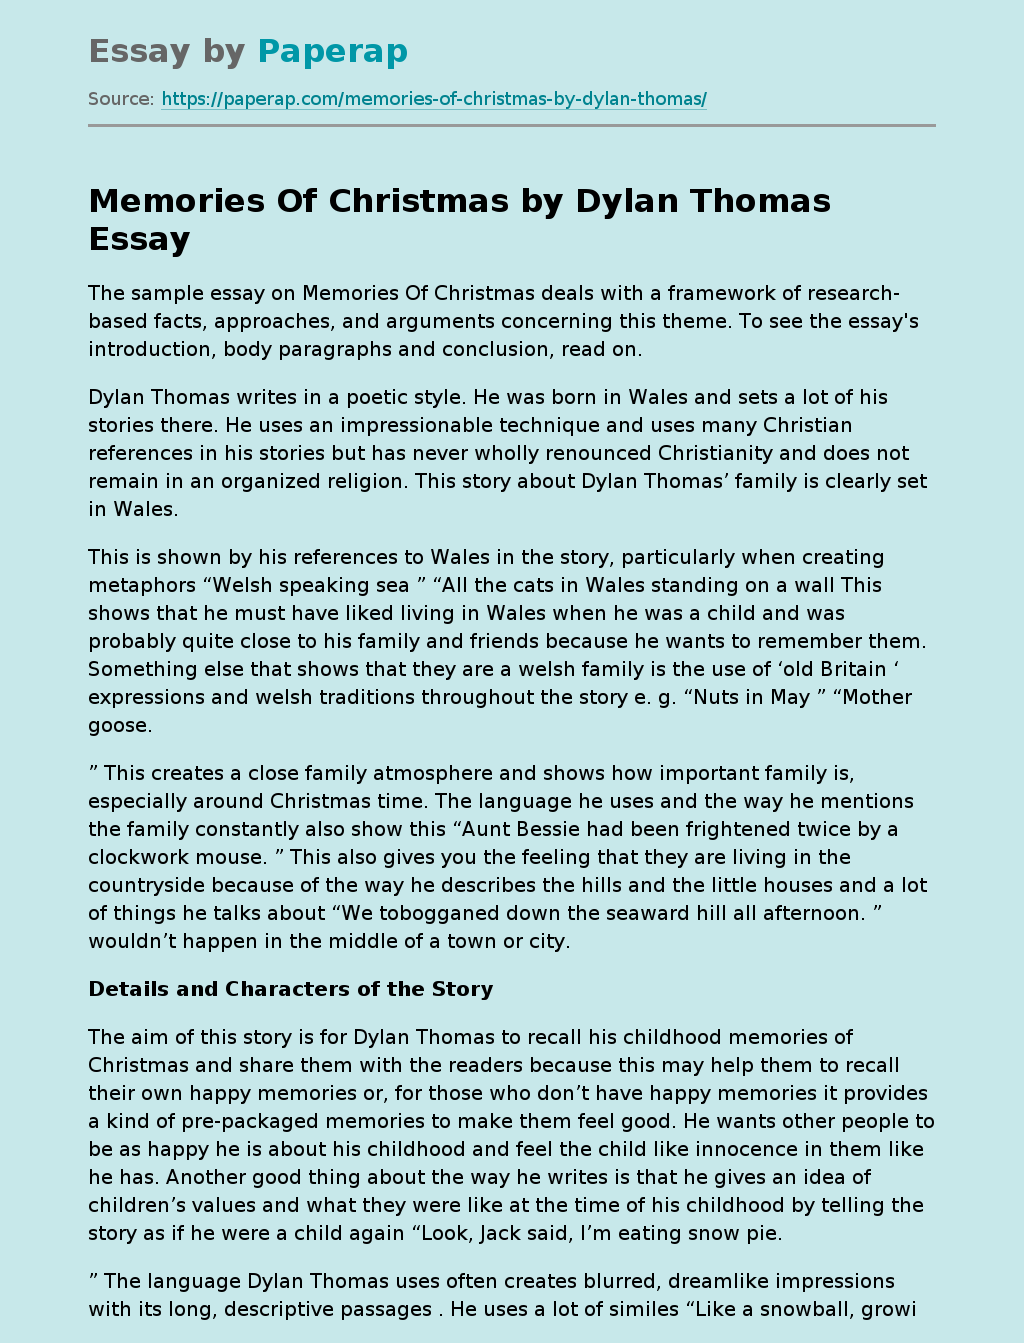 Memories Of Christmas by Dylan Thomas